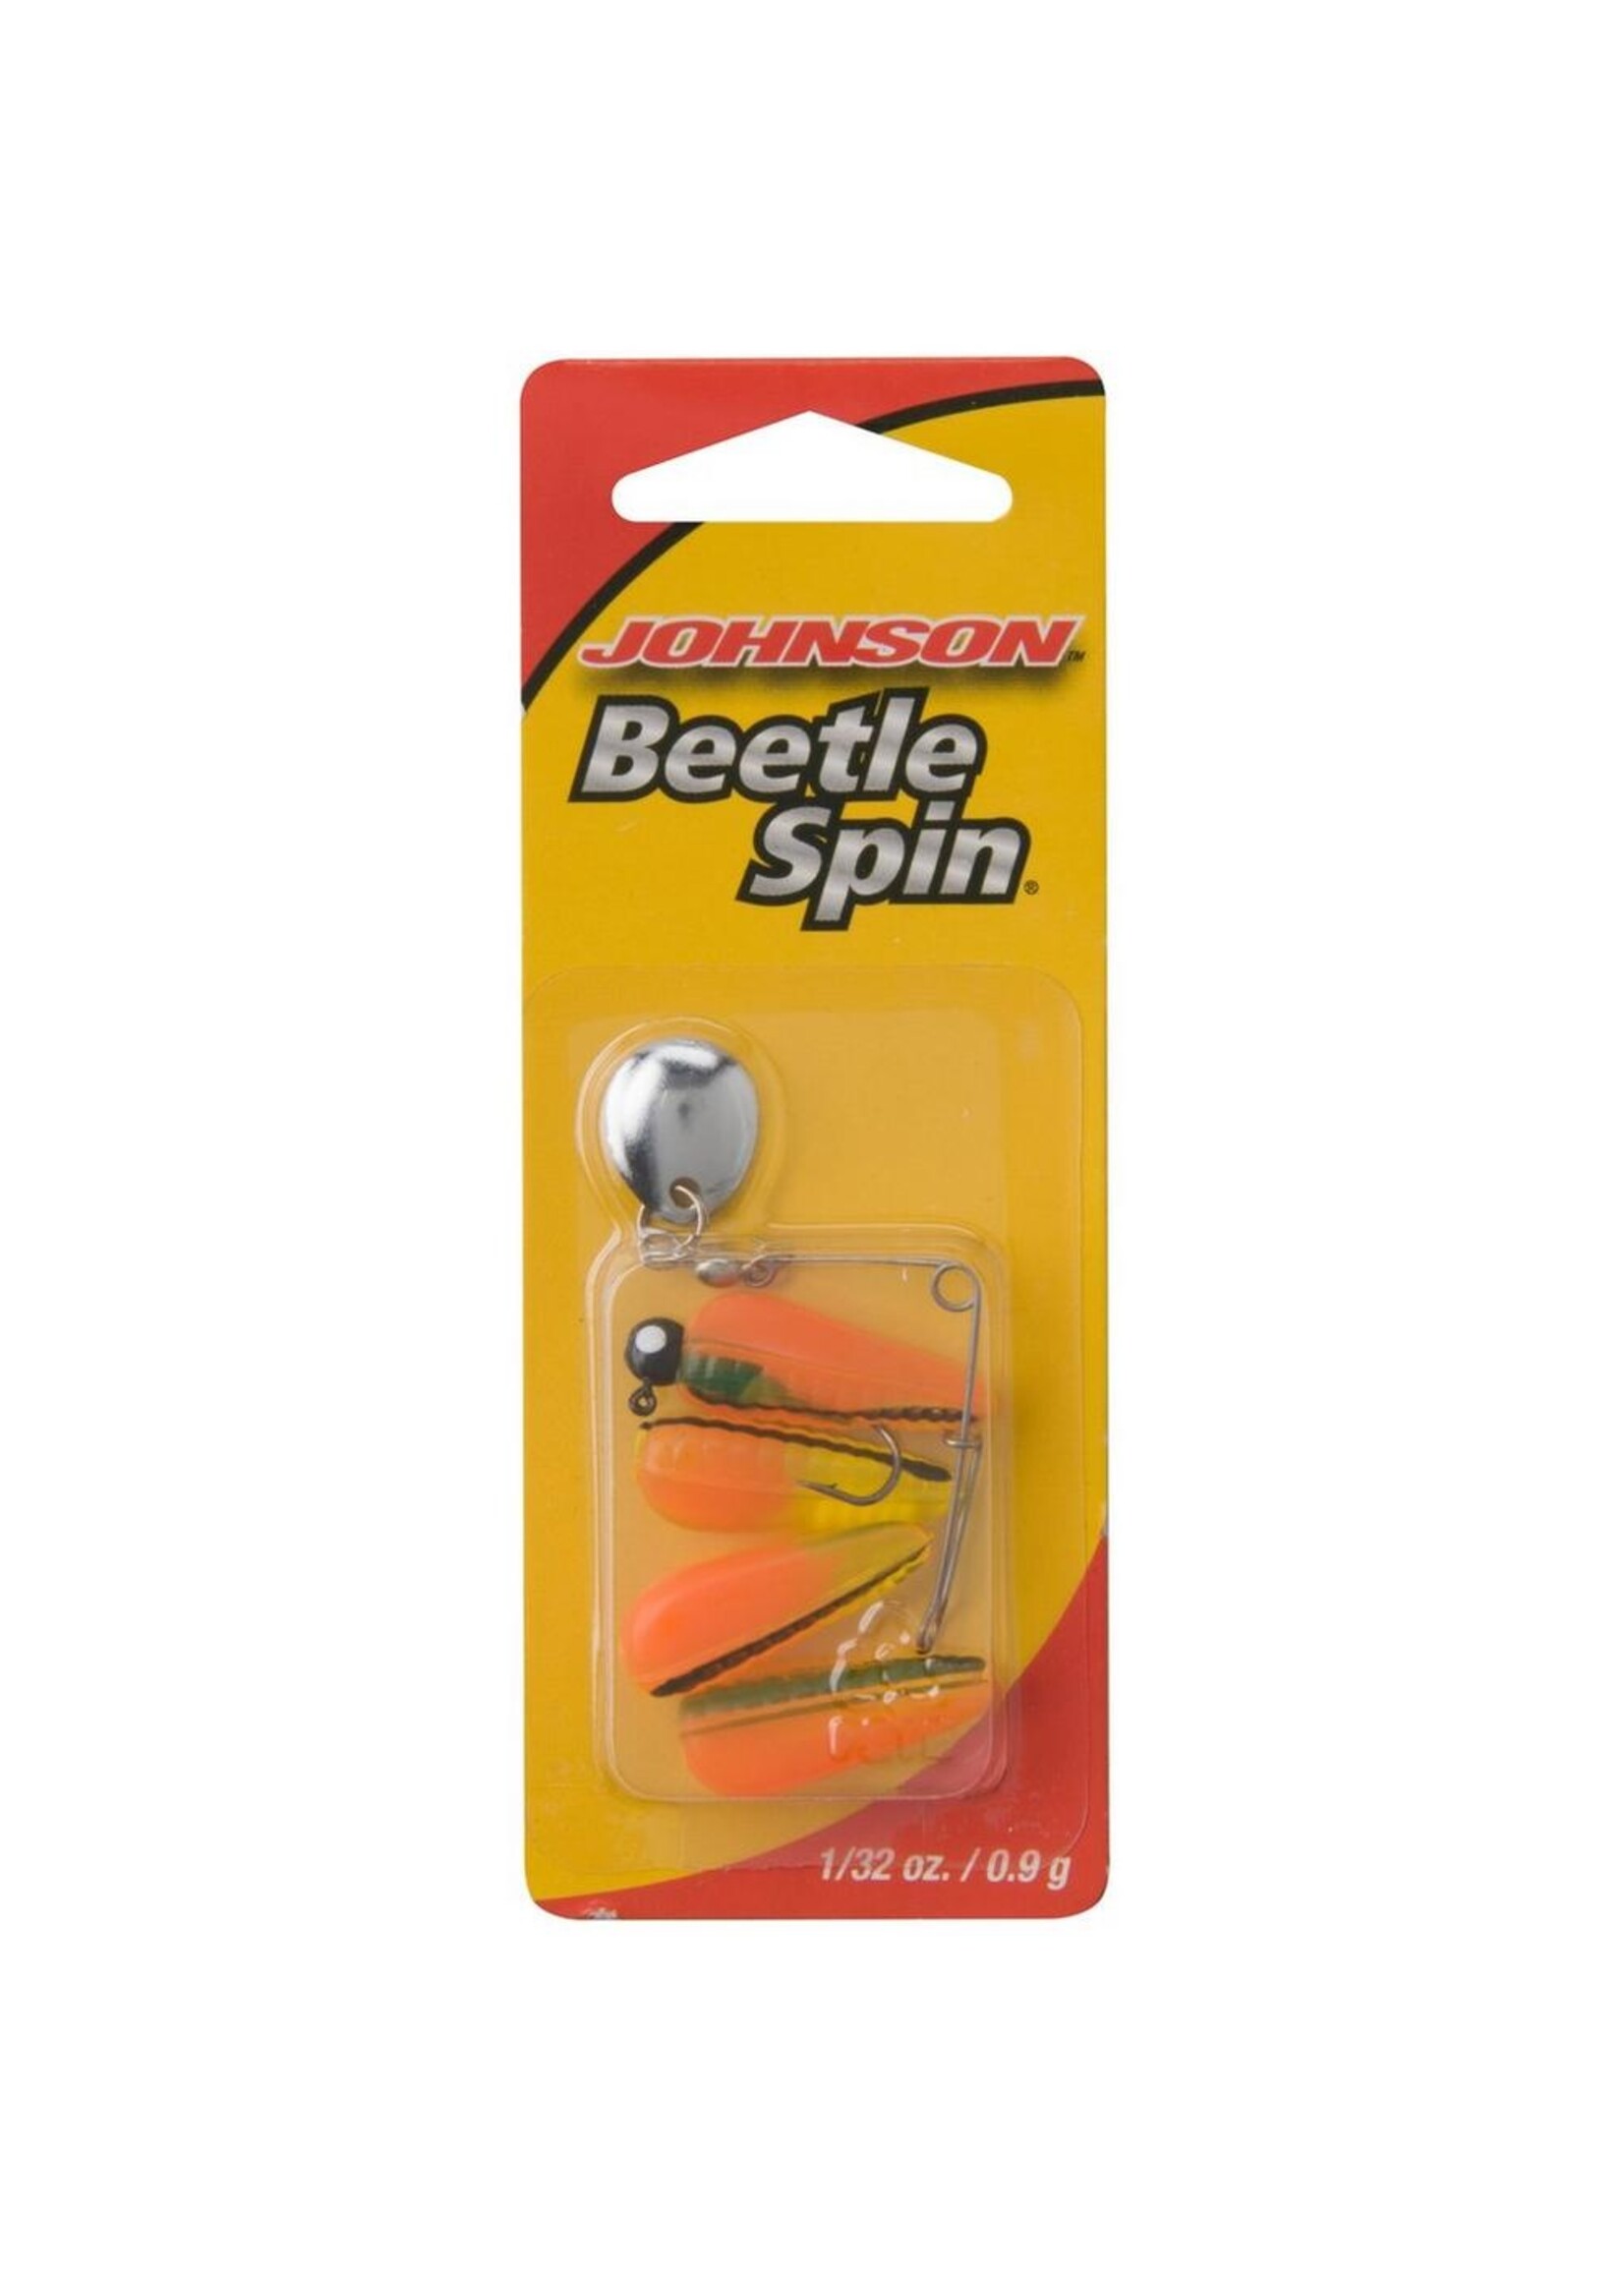  Johnson Beetle Spin Colored Blade - BSVPC1/16-CBS